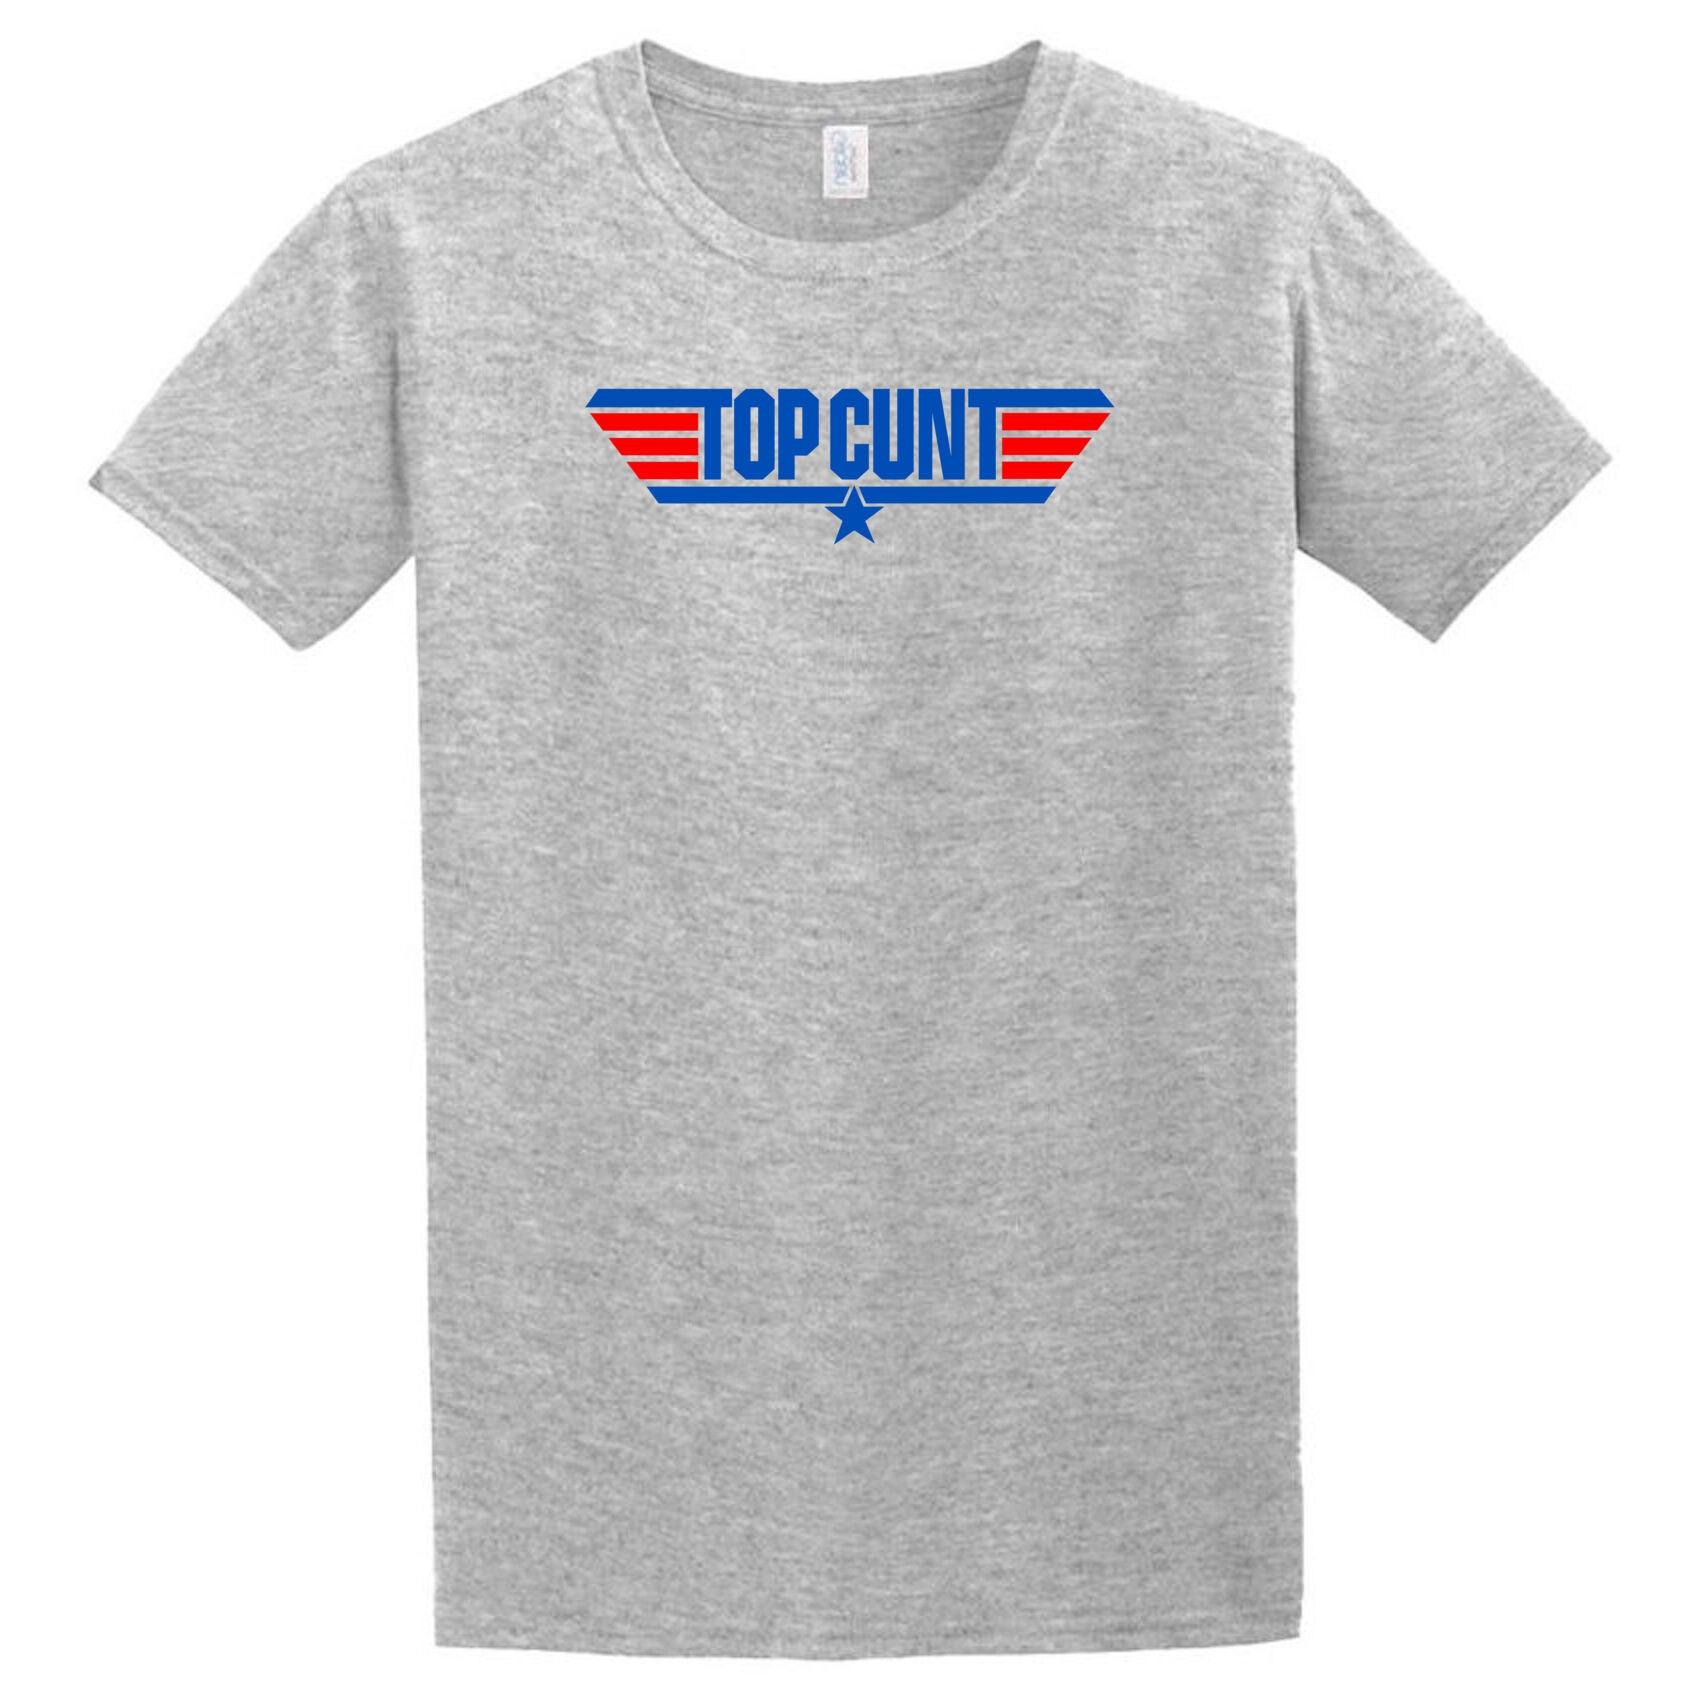 This Top Cunt T-Shirt from Twisted Gifts features the iconic phrase "Up Count" reminiscent of an 80s classic movie.